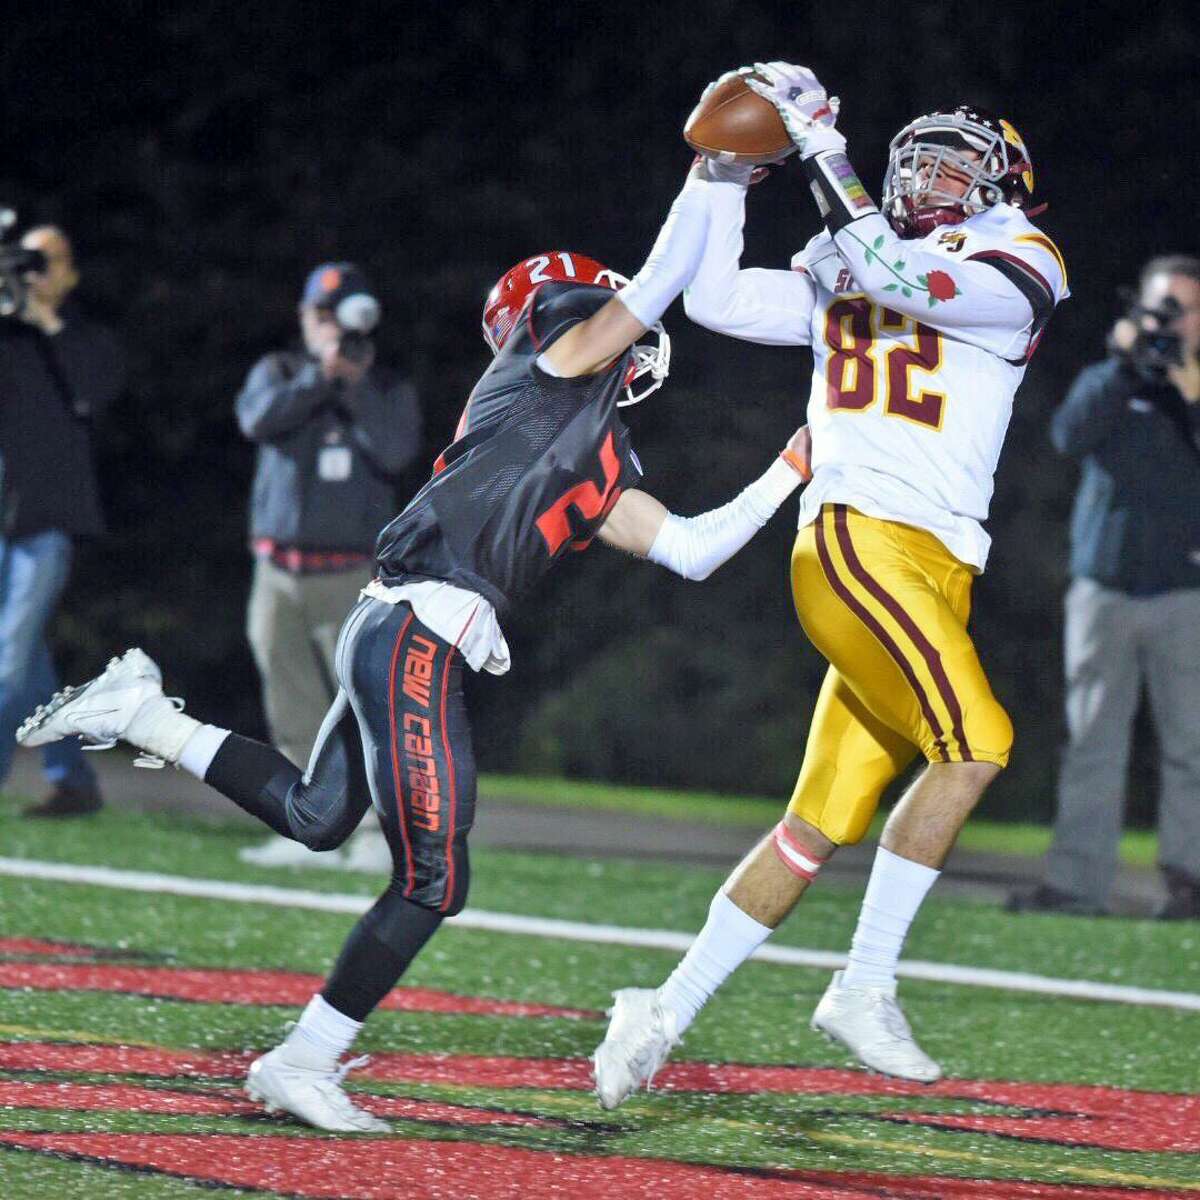 St. Joseph’s Will Diamantis catches a touchdown pass from Jack Wallace with New Canaan’s Dean Ciancio defending during the Cadets’ 58-14 victory on Friday at Dunning Field in New Canaan.